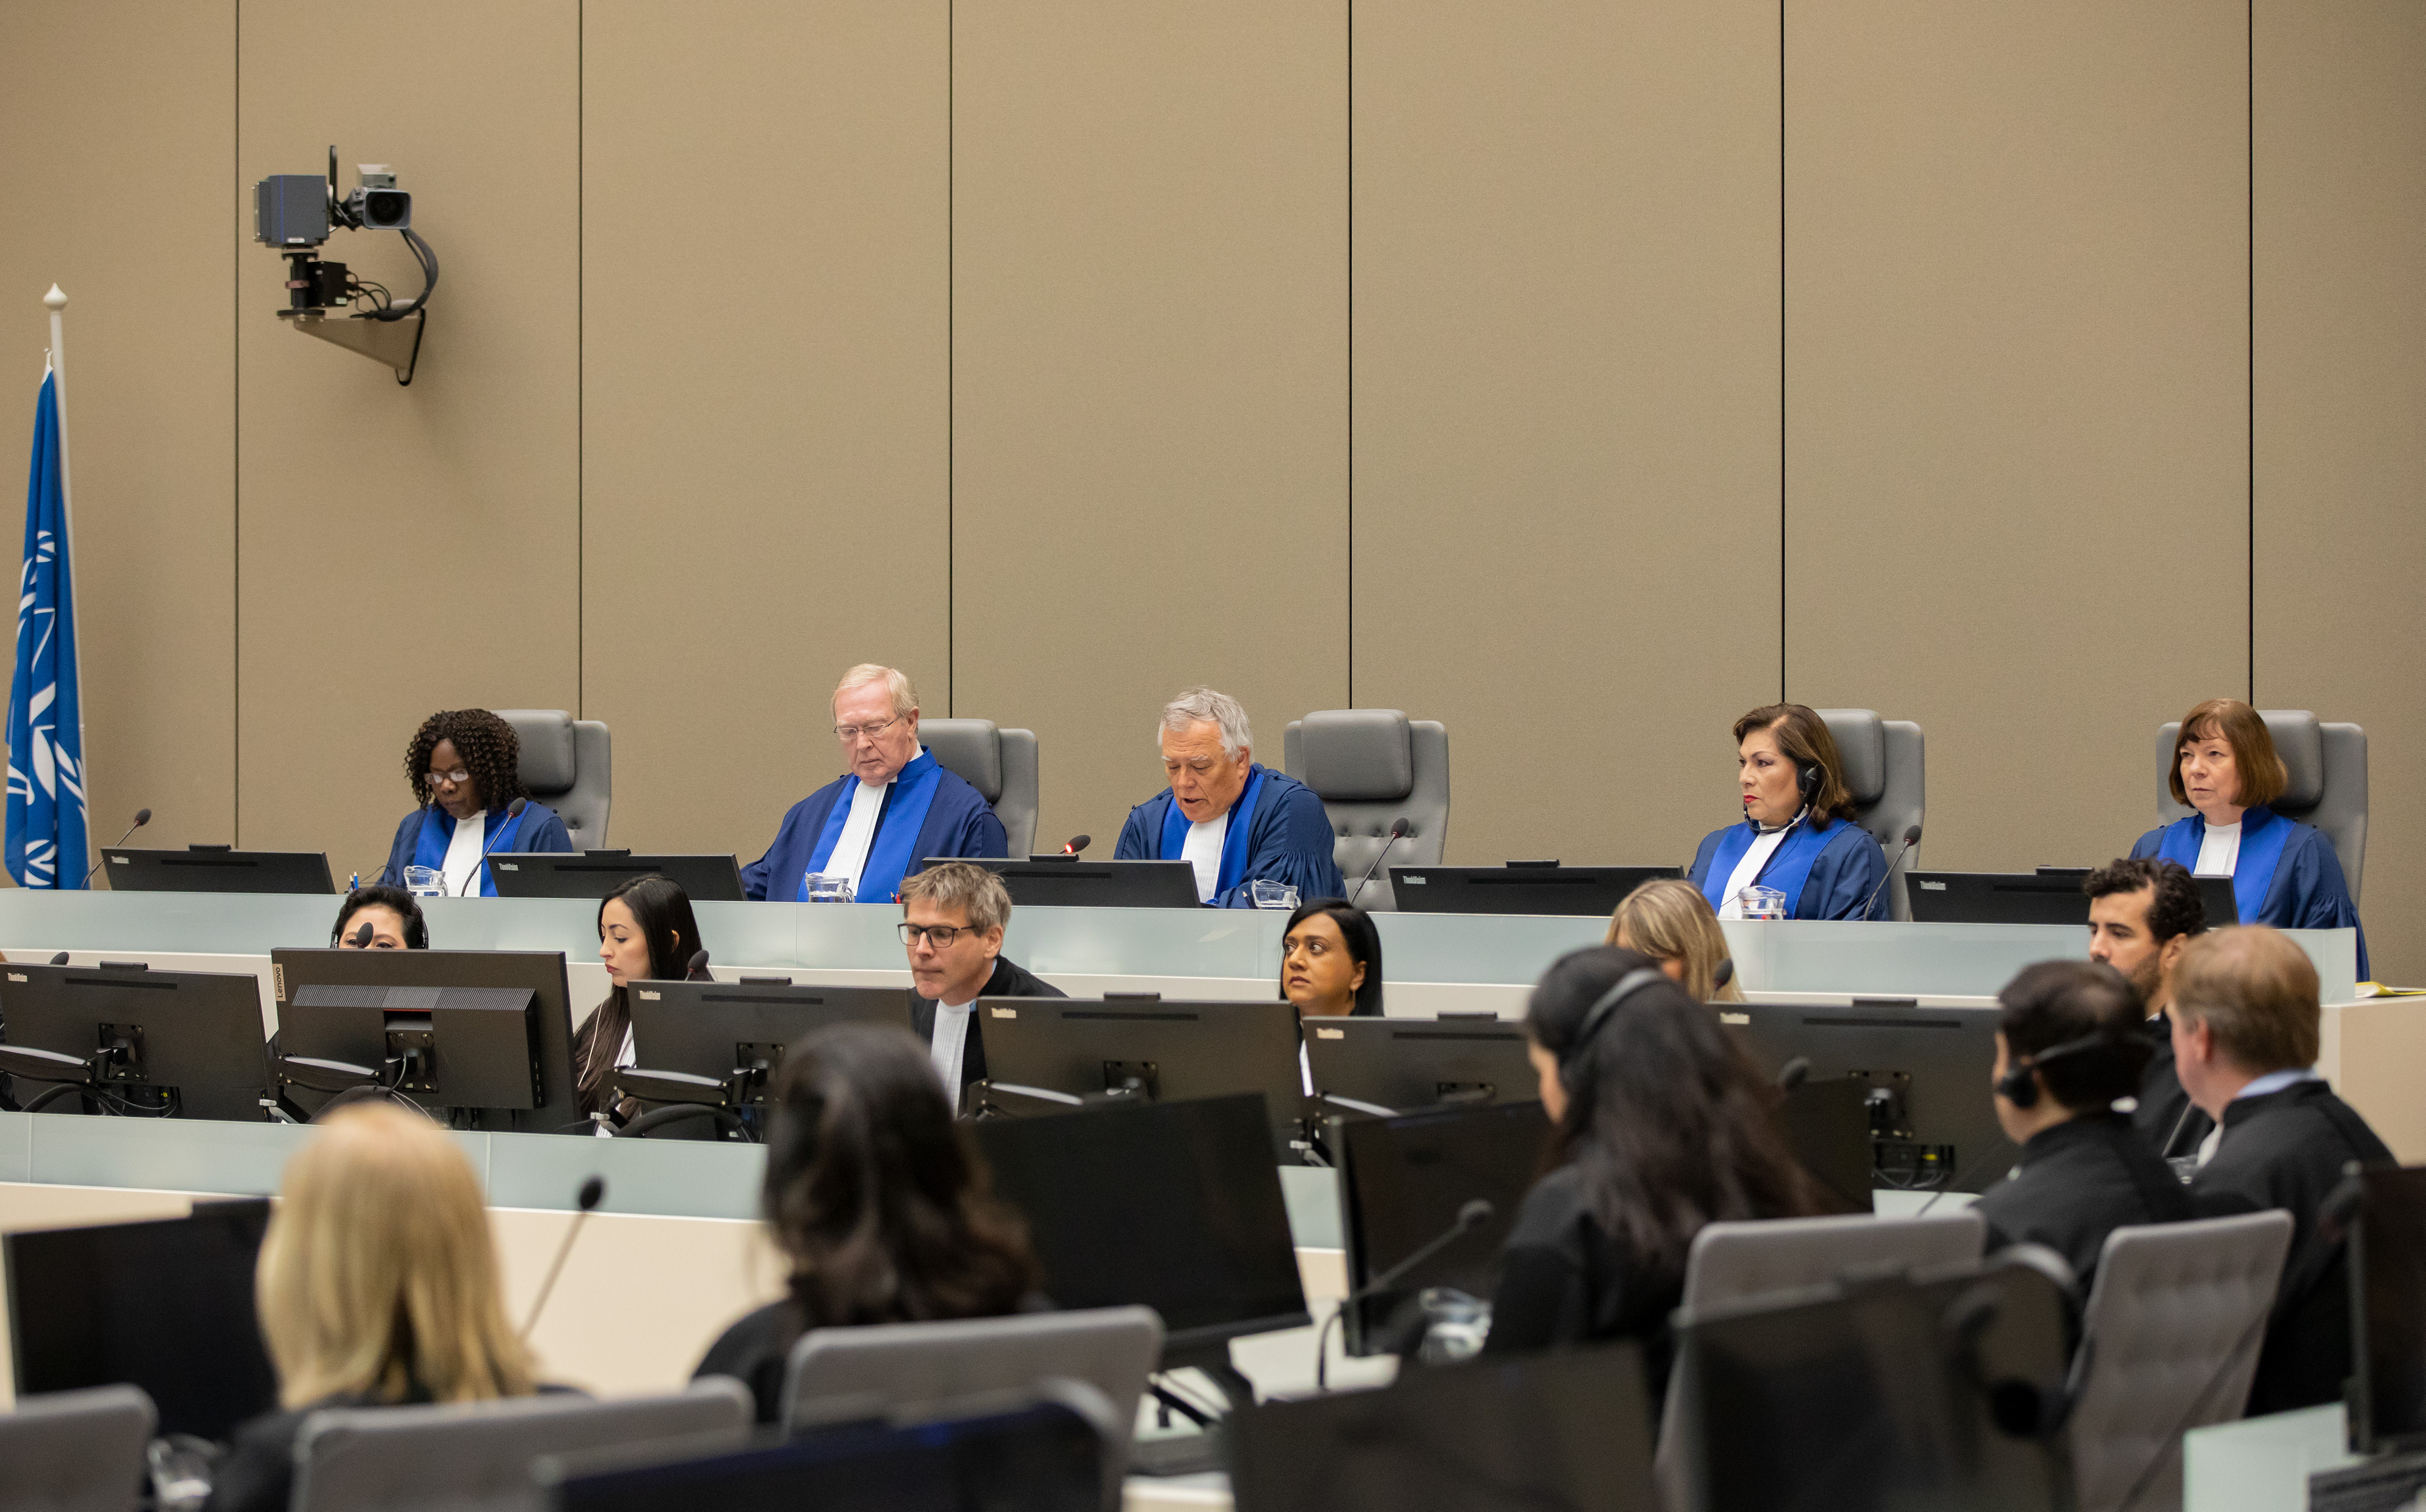 The judges of the Appeals Chamber (l<em>eft to right</em>) Judge Solomy Balungi Bossa, Judge Howard Morrison, Presiding Judge Piotr Hofmański, Judge Luz del Carmen Ibáñez Carranza, and Judge Kimberly Prost on 5 March 2020 at the seat of the International Criminal Court in The Hague, Netherlands. ©ICC-CPI